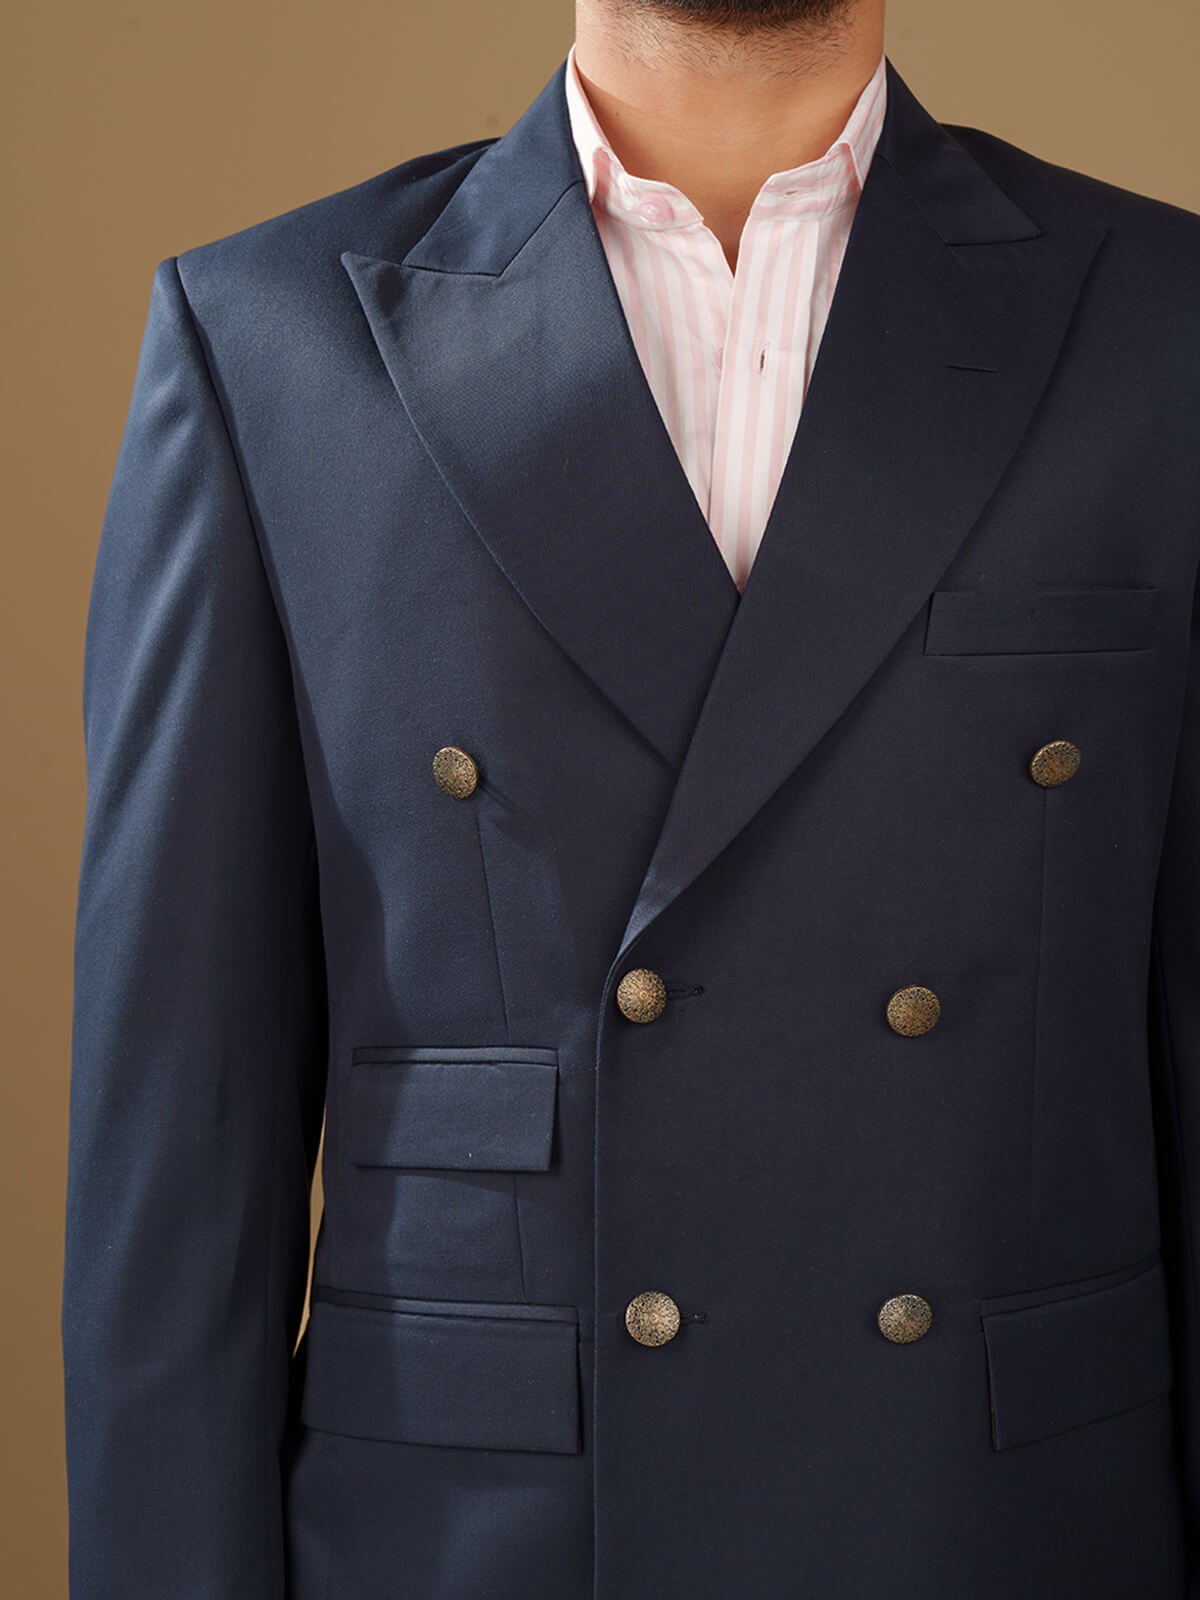 Double Breasted All Weather Navy Blue Blazer